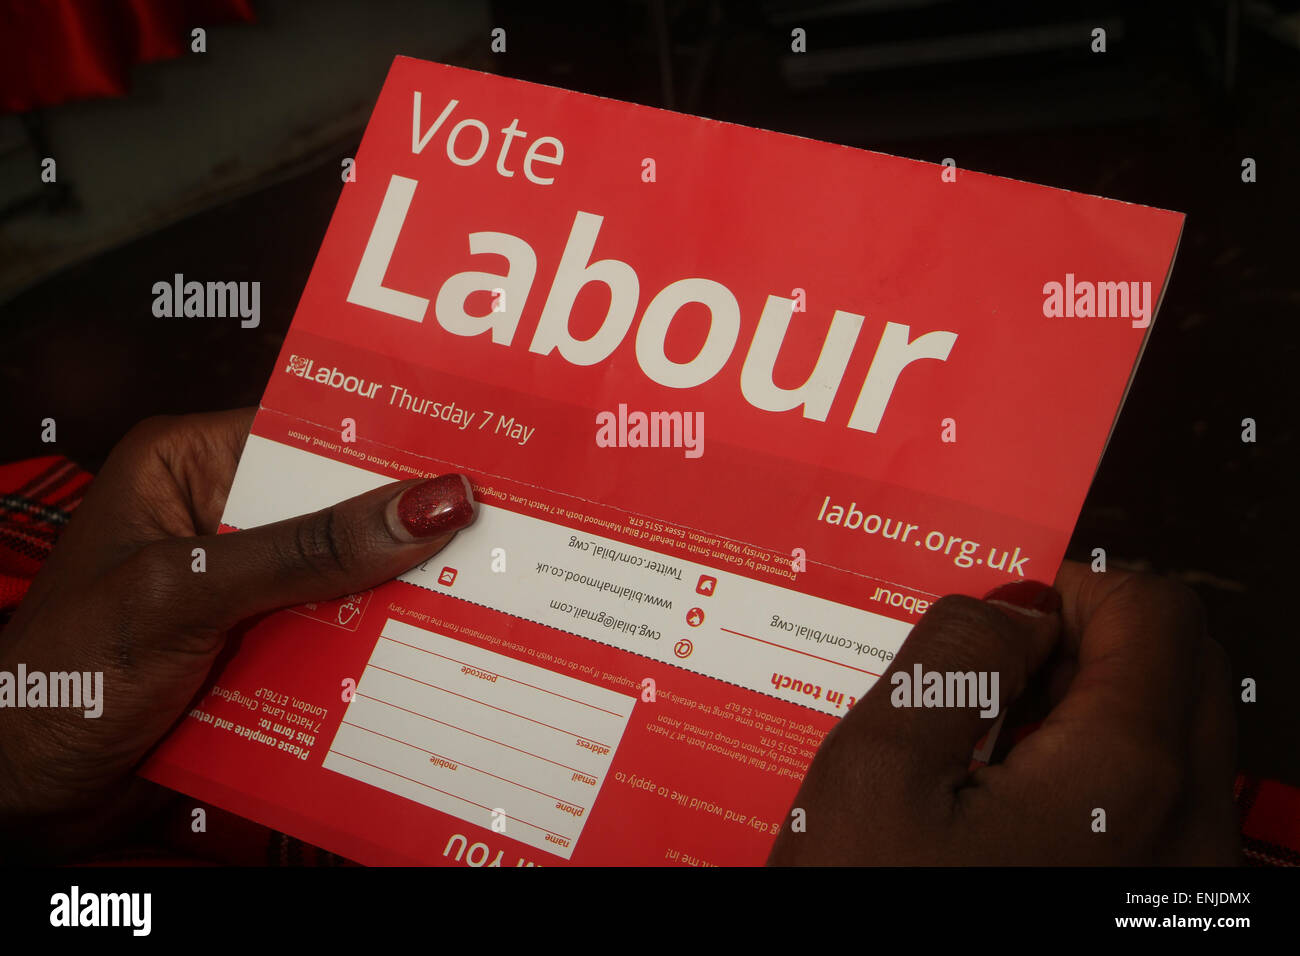 London, UK. 6 May 2015. An immigrant voter reads a Labour election flyer. Voters in the UK prepare to go to the polls on Thursday 7 May, in an election seen as one of the closest-fought in years. Britain's two-party system appears under severe threat, with the distinct prospect that between them Labour and the Conservatives will struggle to gain two-thirds of the votes cast. Compare that with their near 90% vote share just 50 years ago. Credit: David Mbiyu/ Alamy Live News Stock Photo